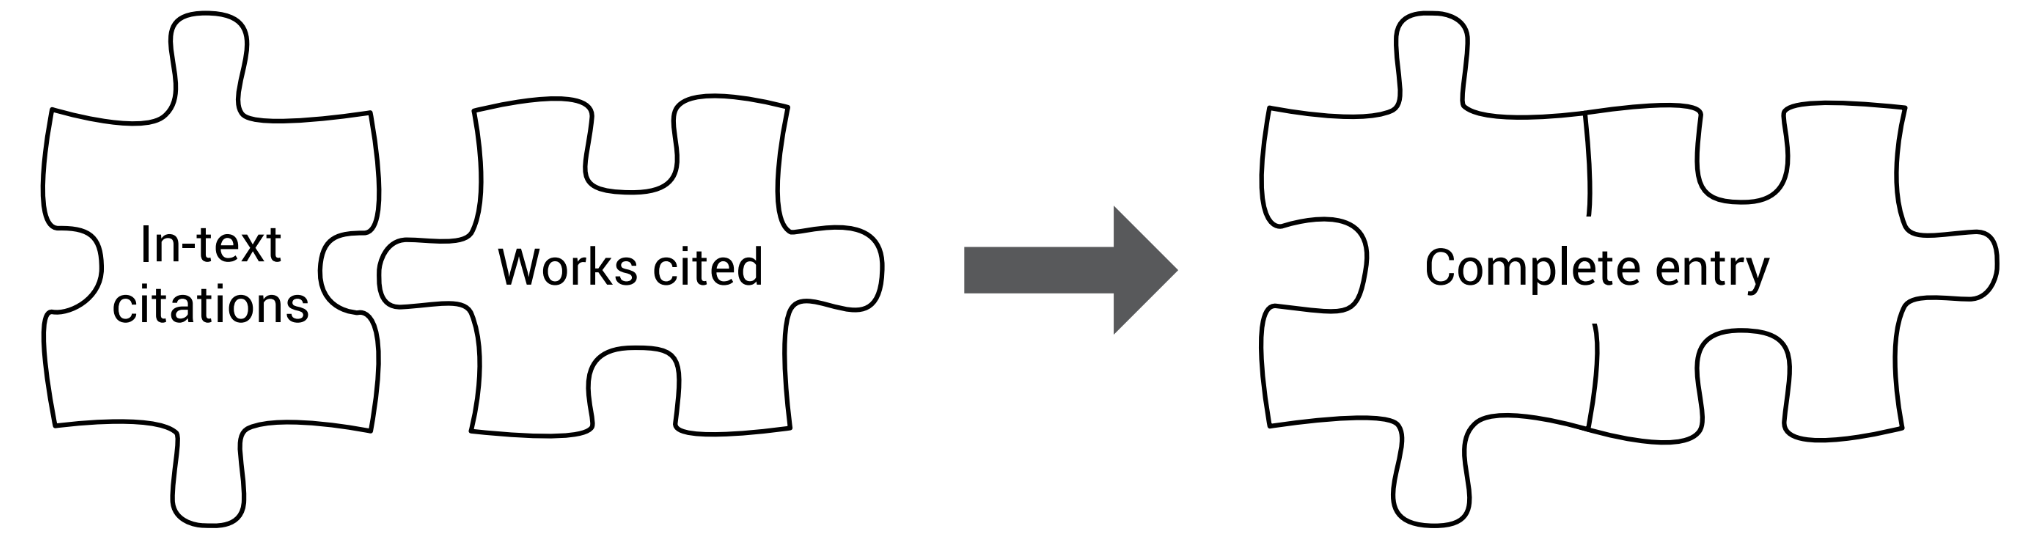 Two puzzle pieces, labelled "in-text citations" and "works cited" come together to form a complete MLA citation.